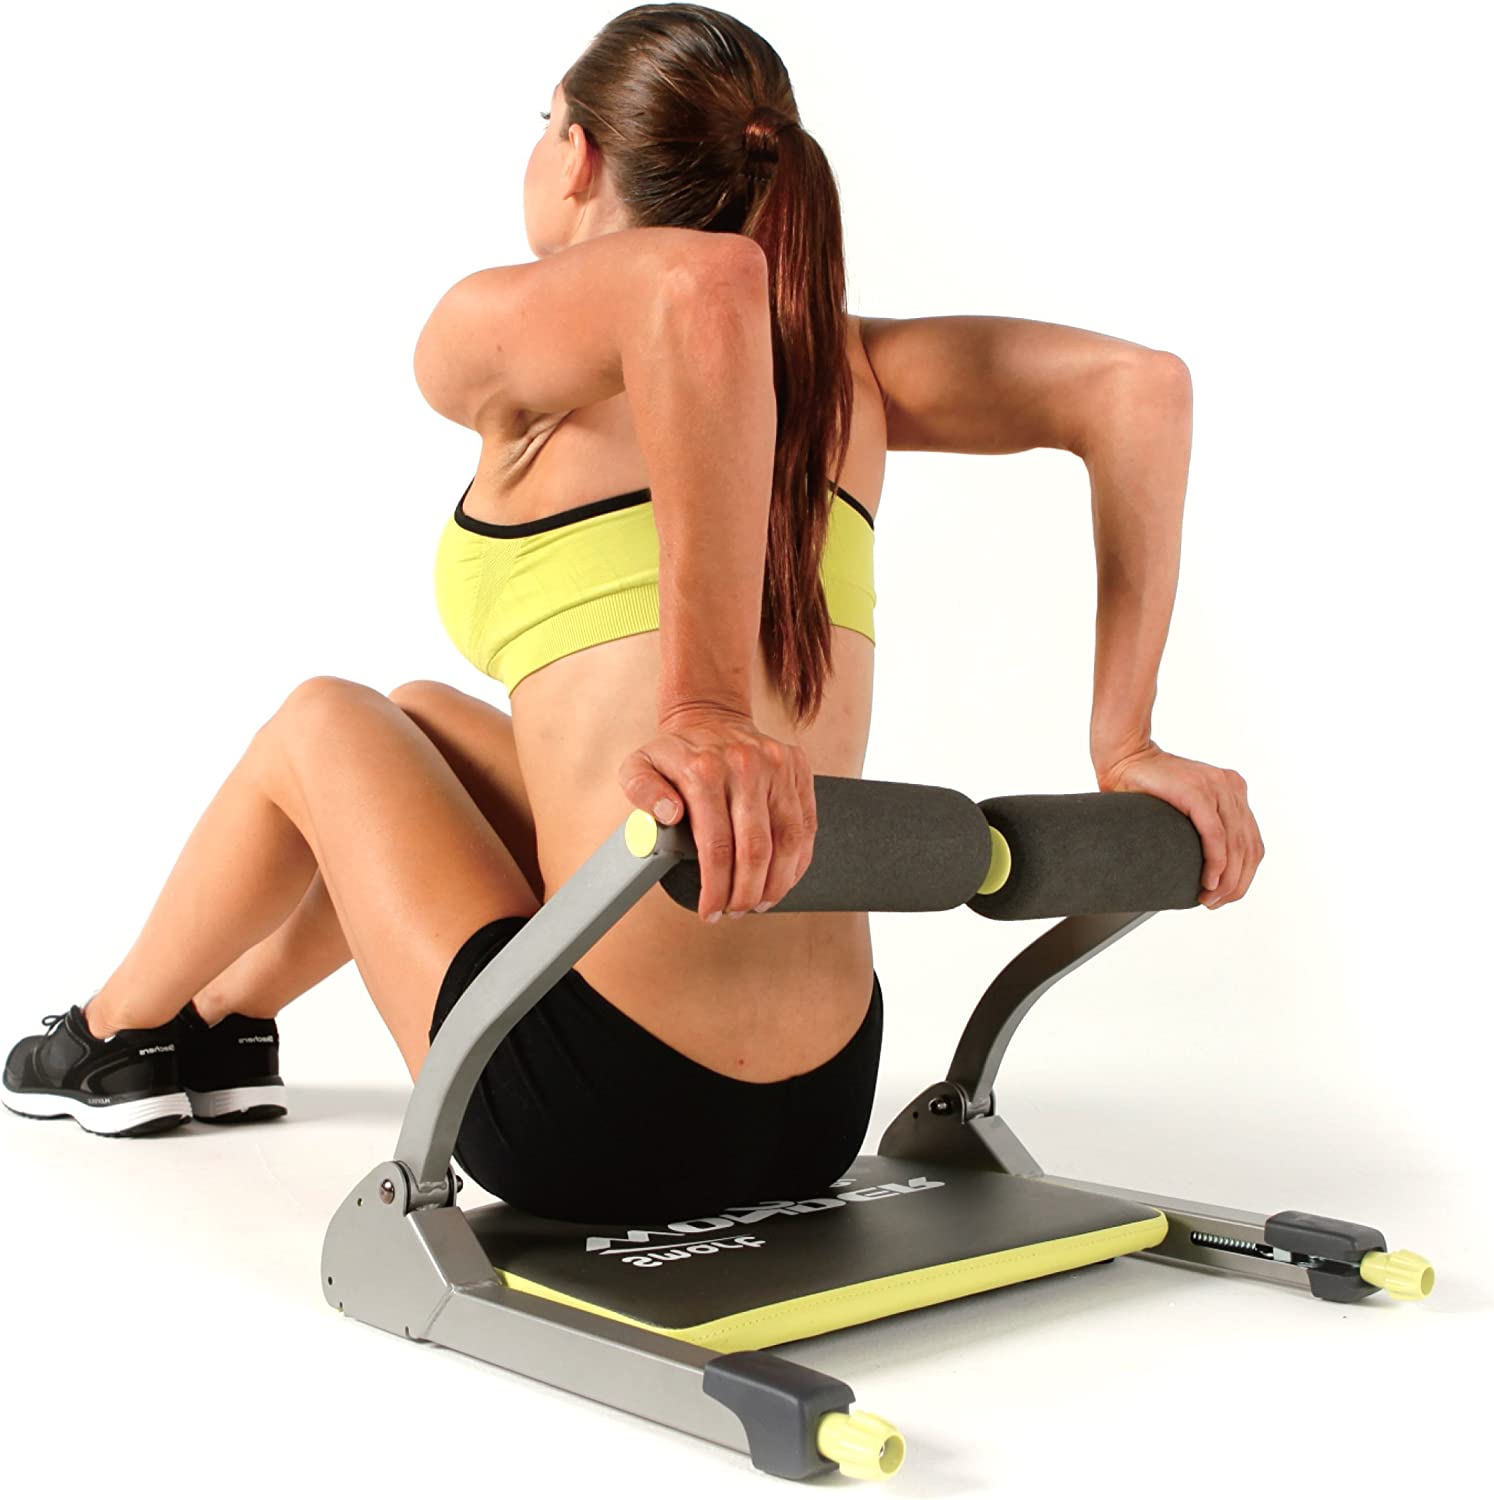 WONDER CORE Smart Cardio exercise machine and tighten the muscles of the body